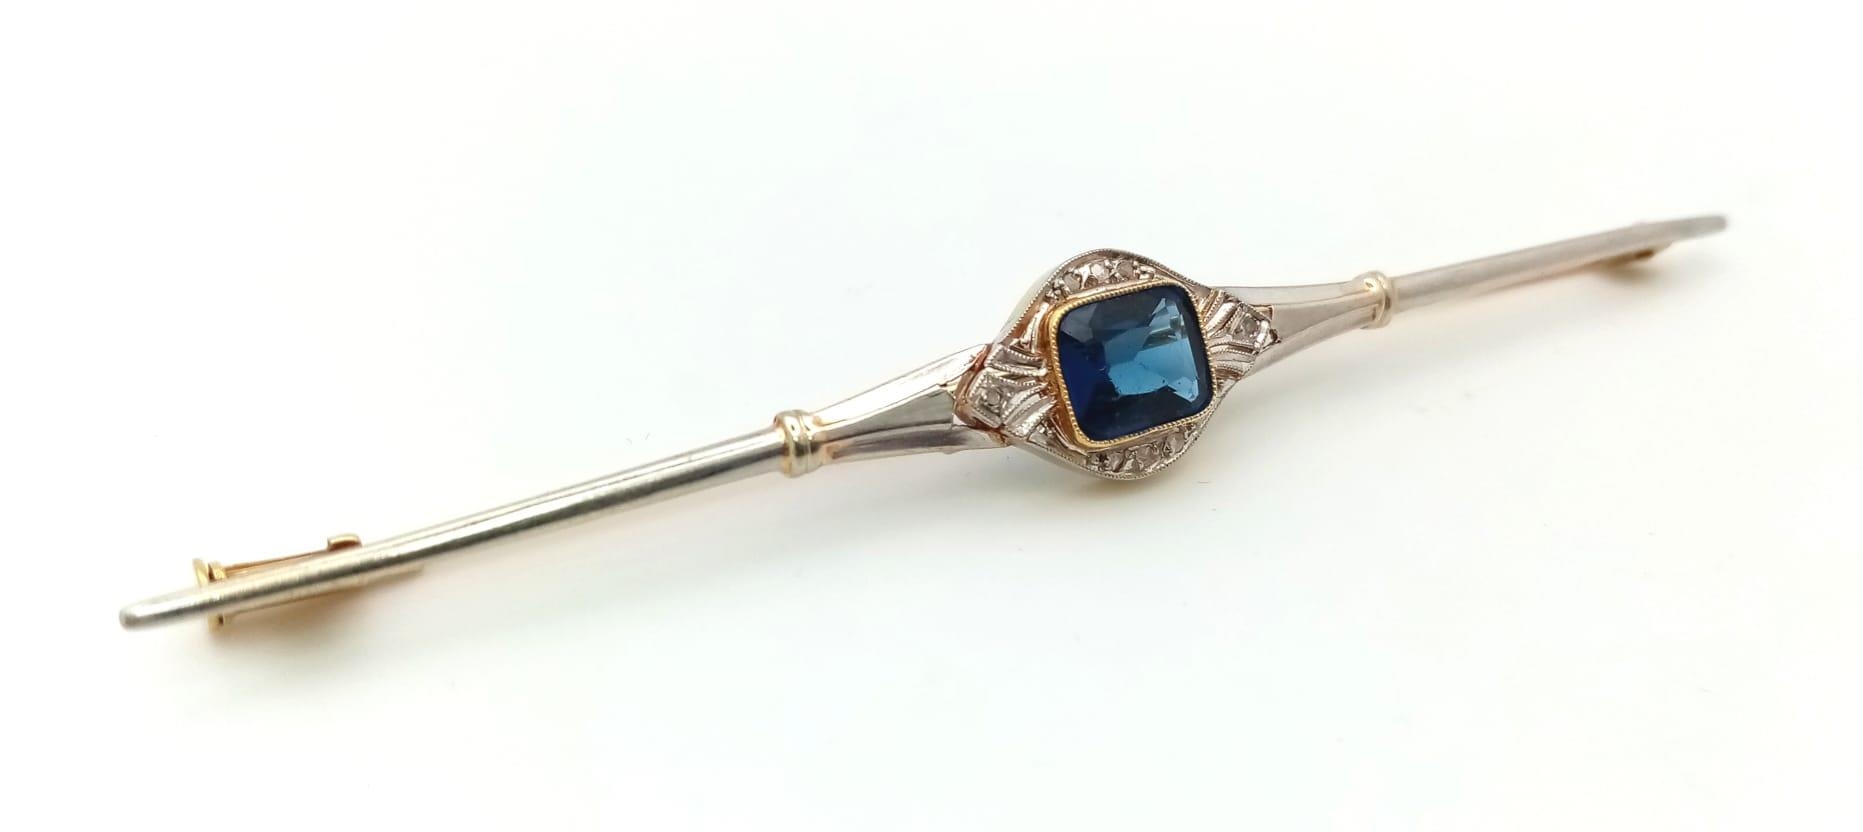 An Antique Victorian 18K Yellow Gold Sapphire and Diamond Brooch. 8cm. 4.03g total weight. - Image 3 of 5